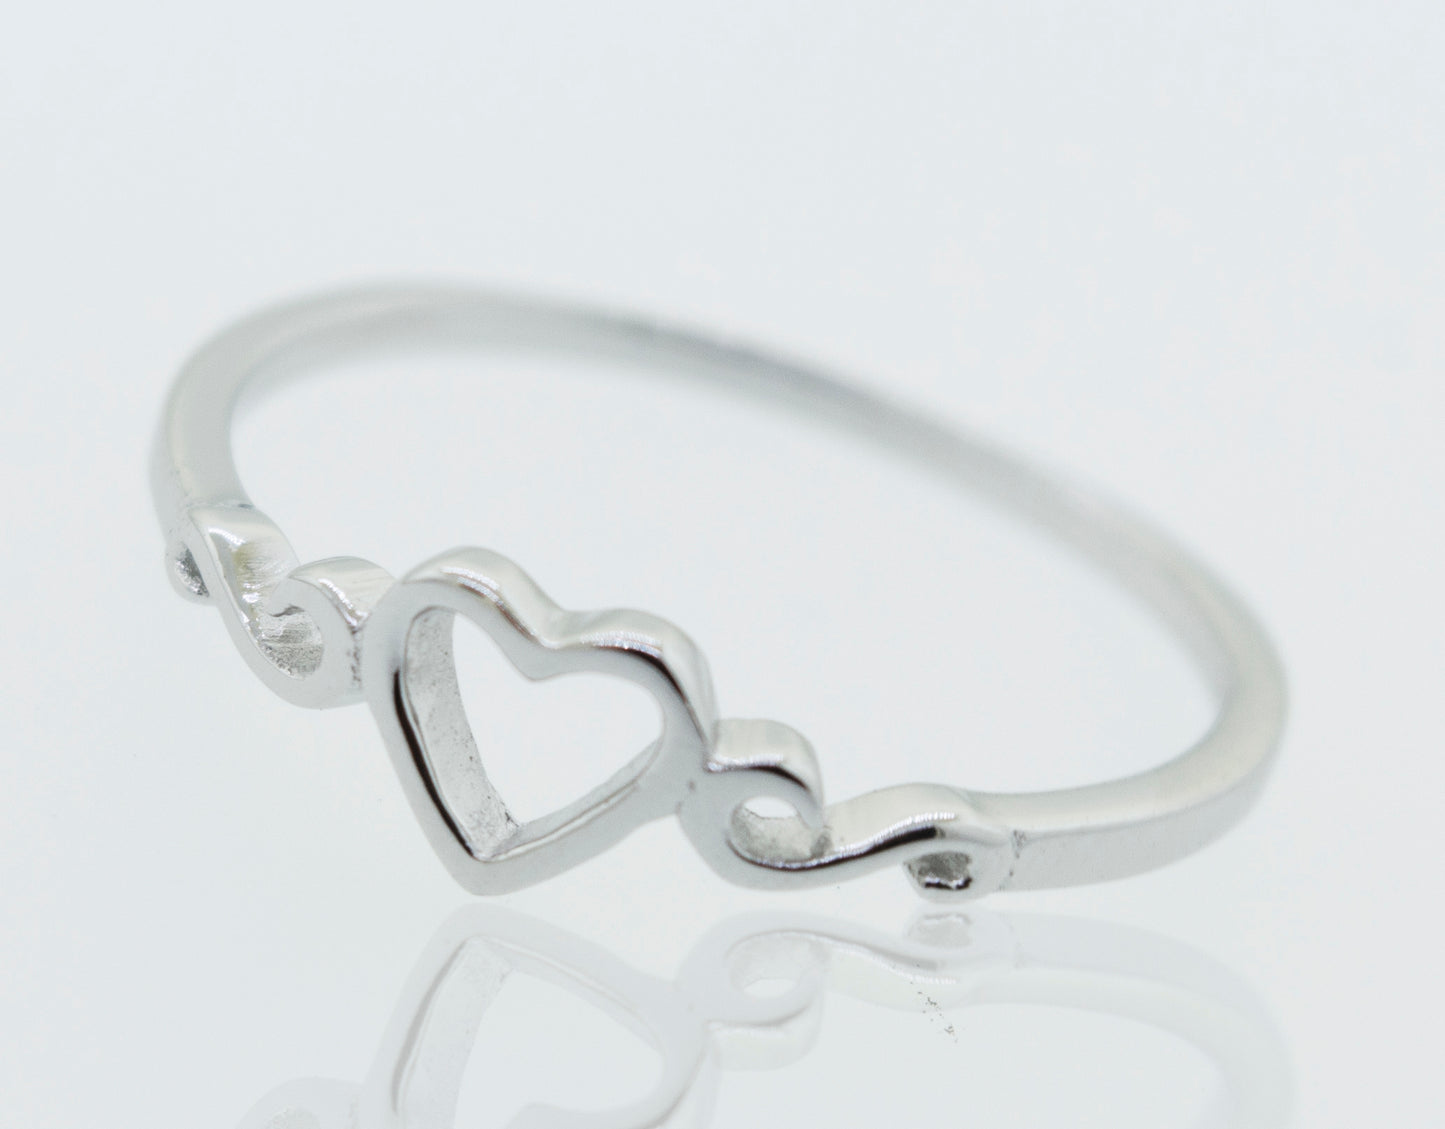 A Simple Open Heart Ring on a white surface.